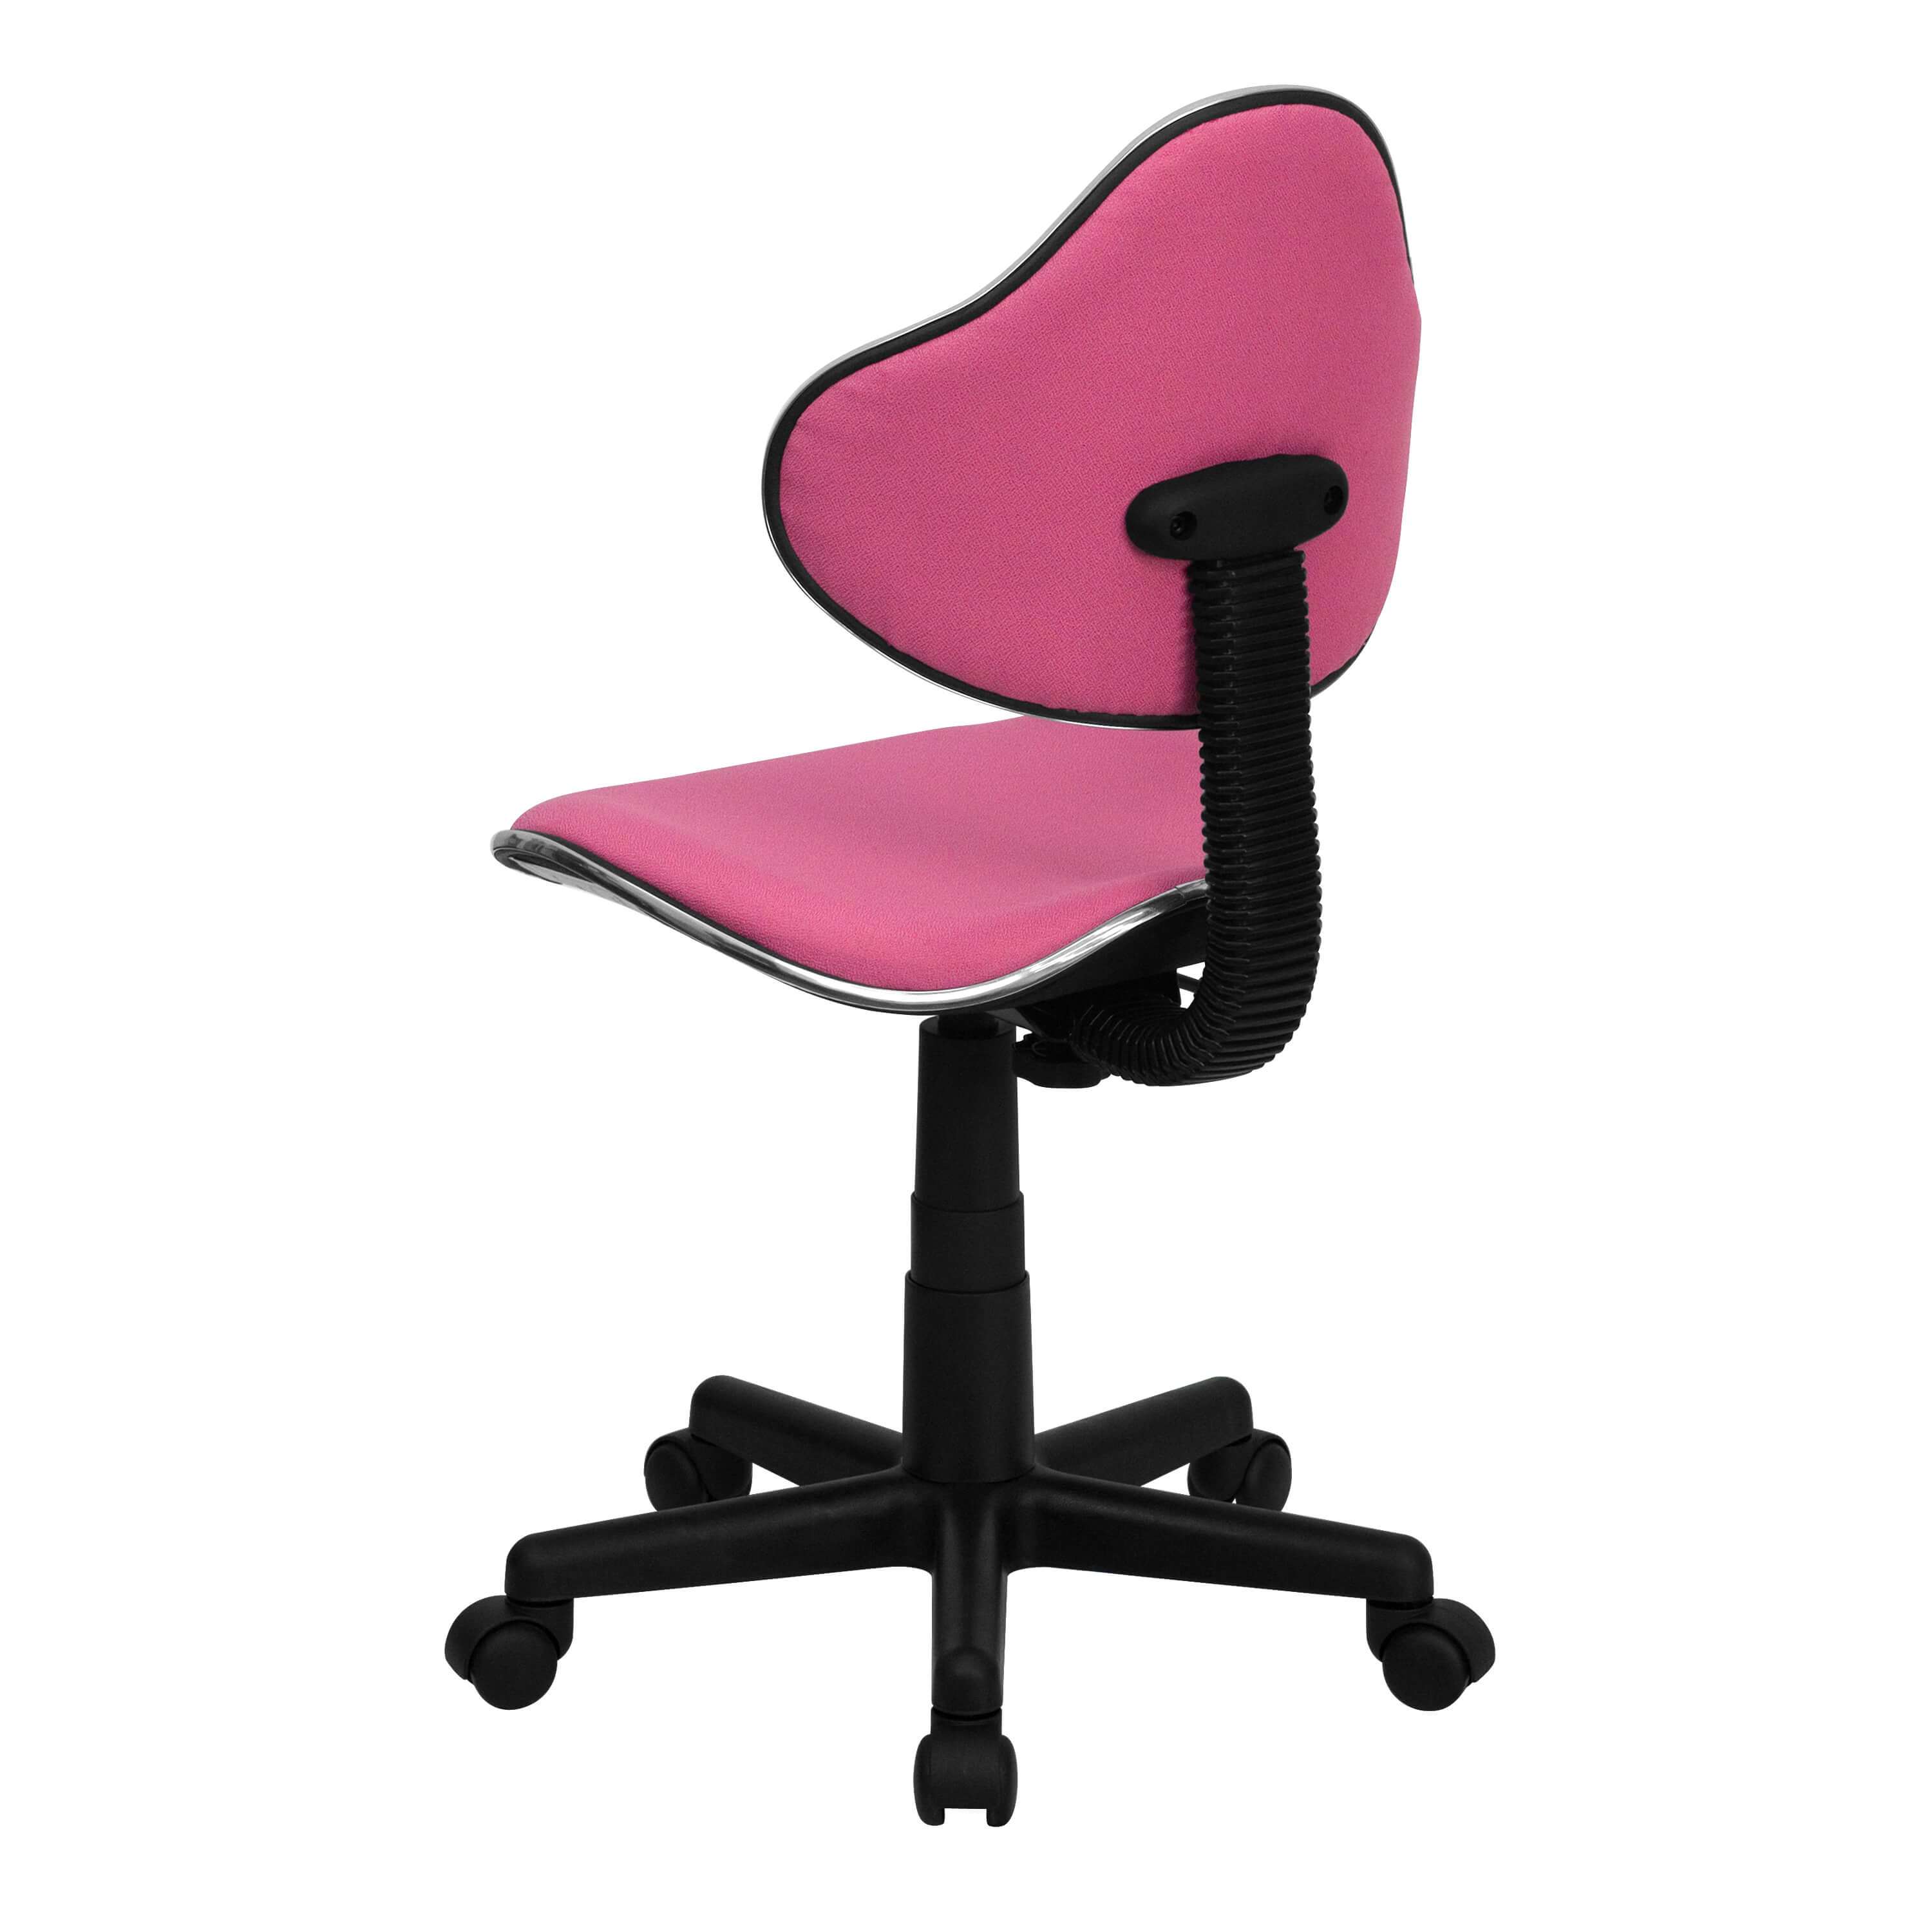 Armless office chair rear view